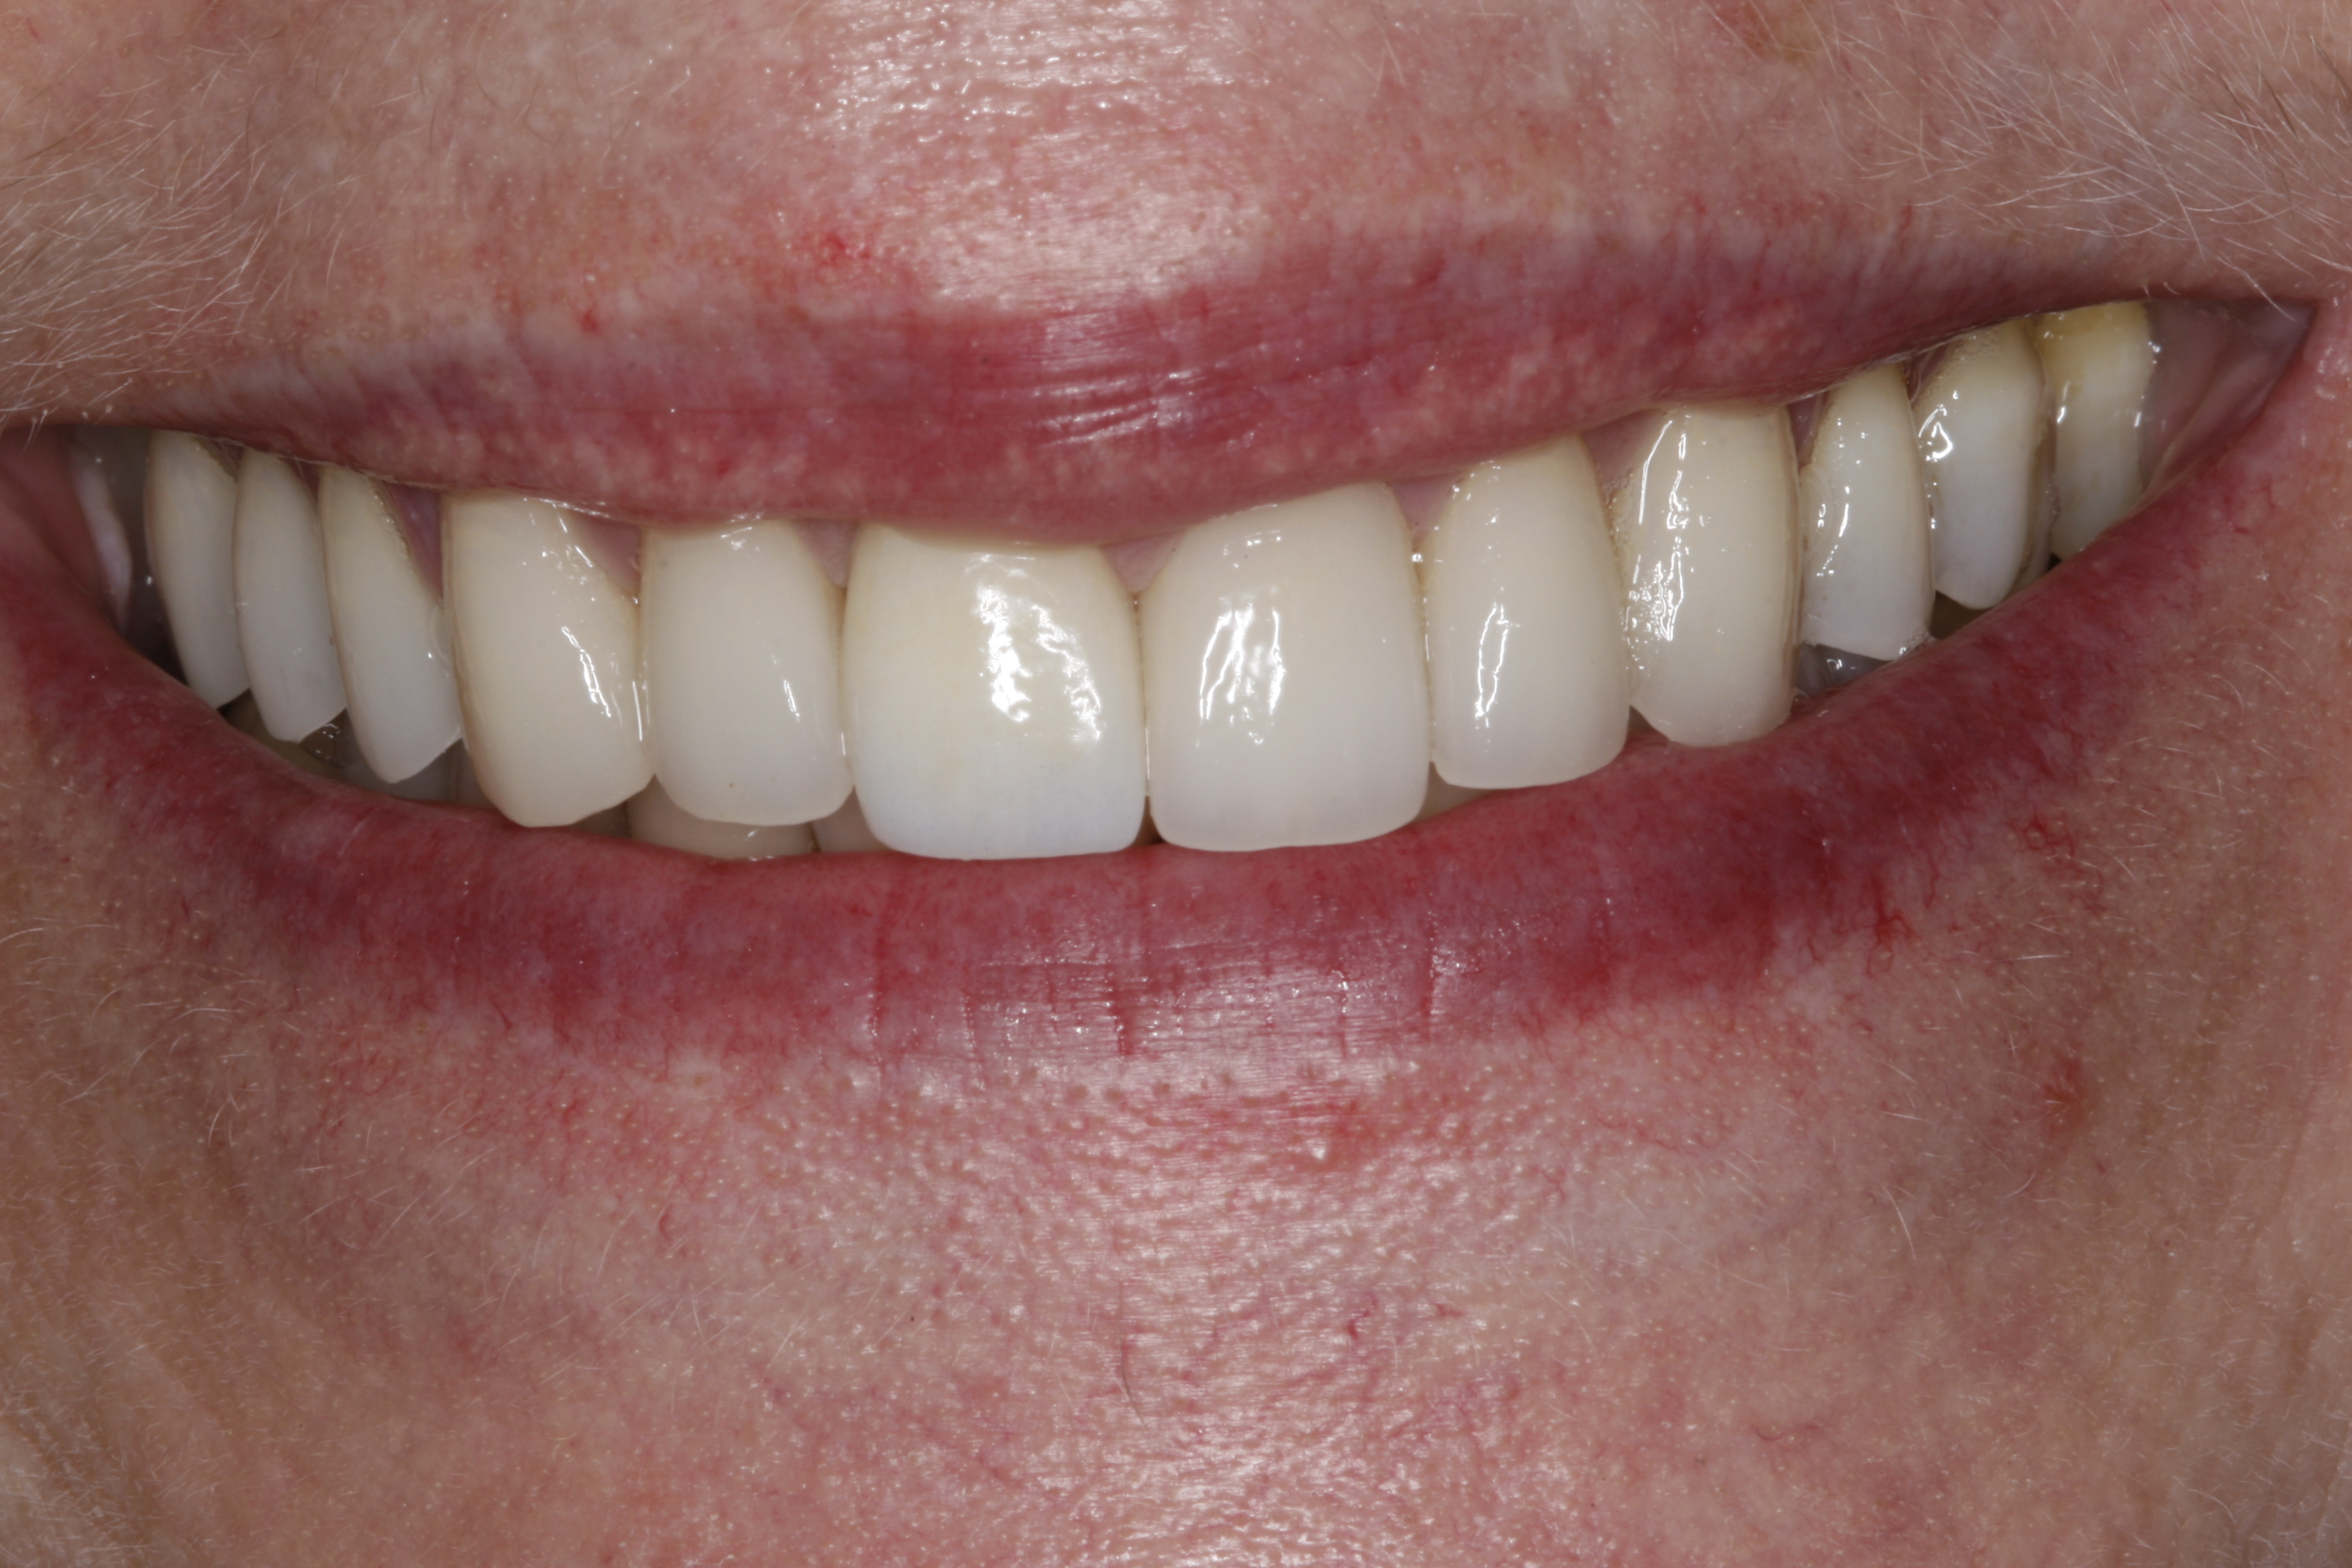 After treatment by Wilsonville dentist